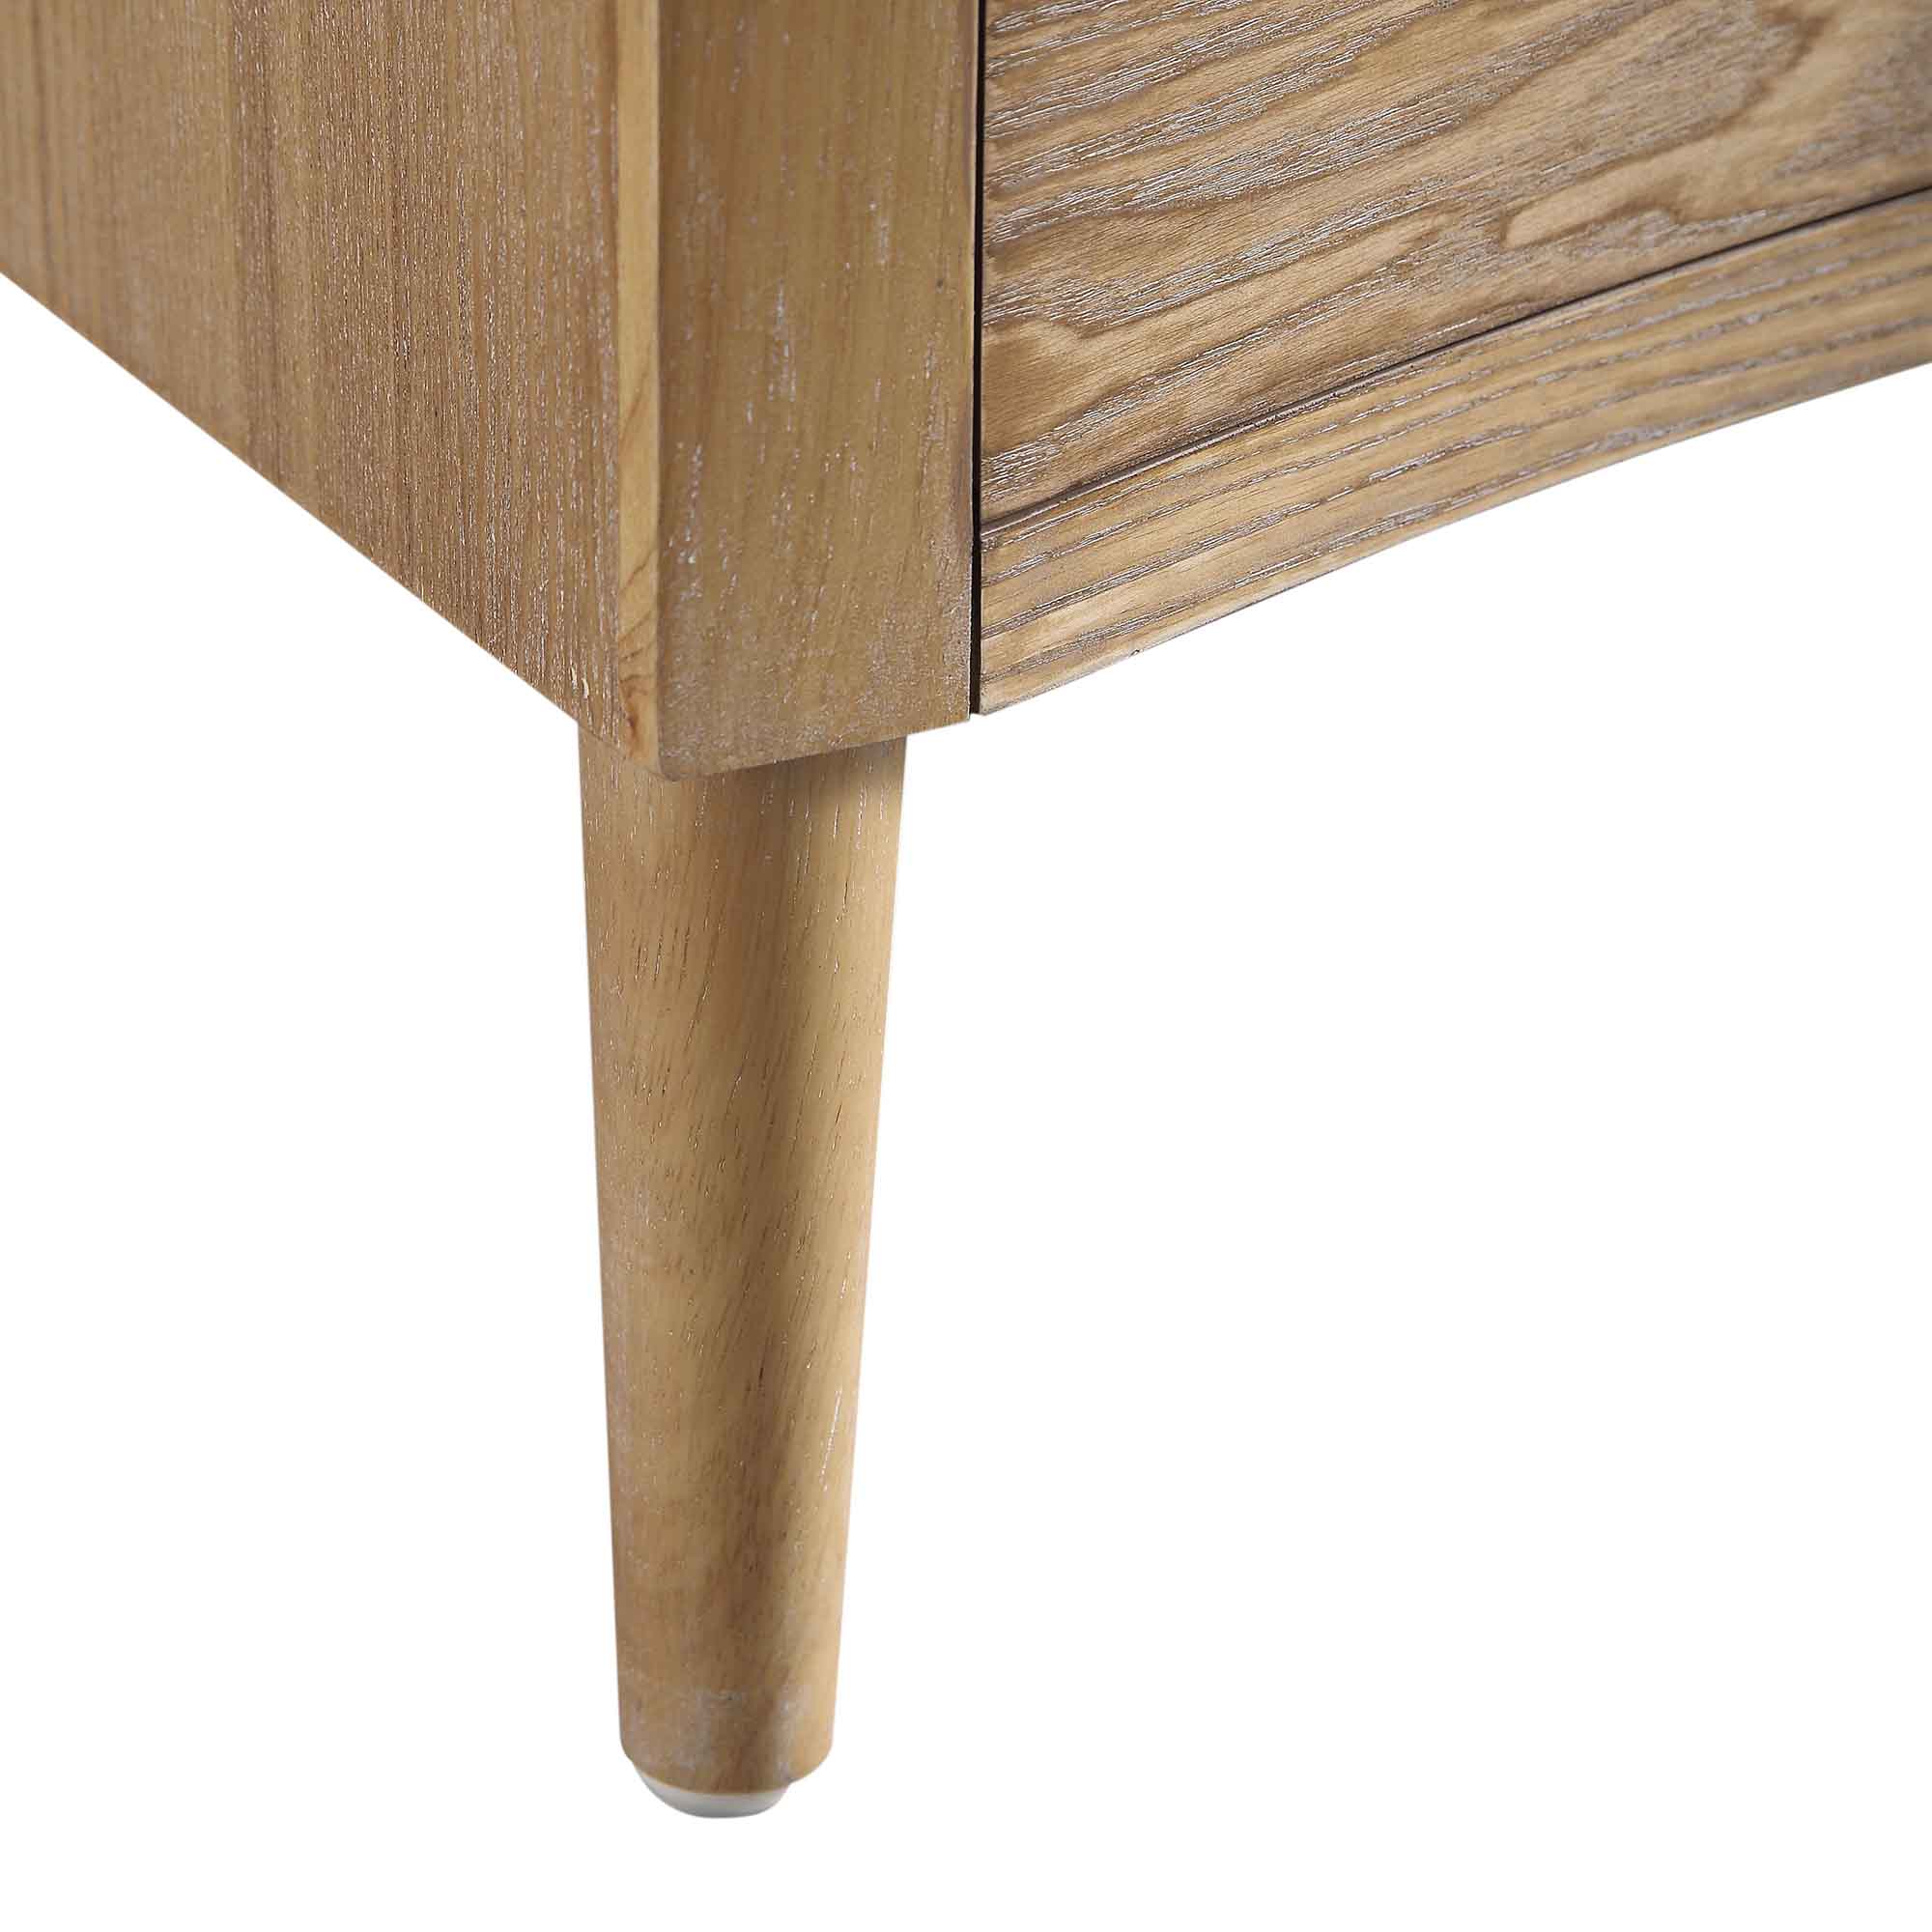 Thalia Concave 3 Drawer Bedside Table, Natural